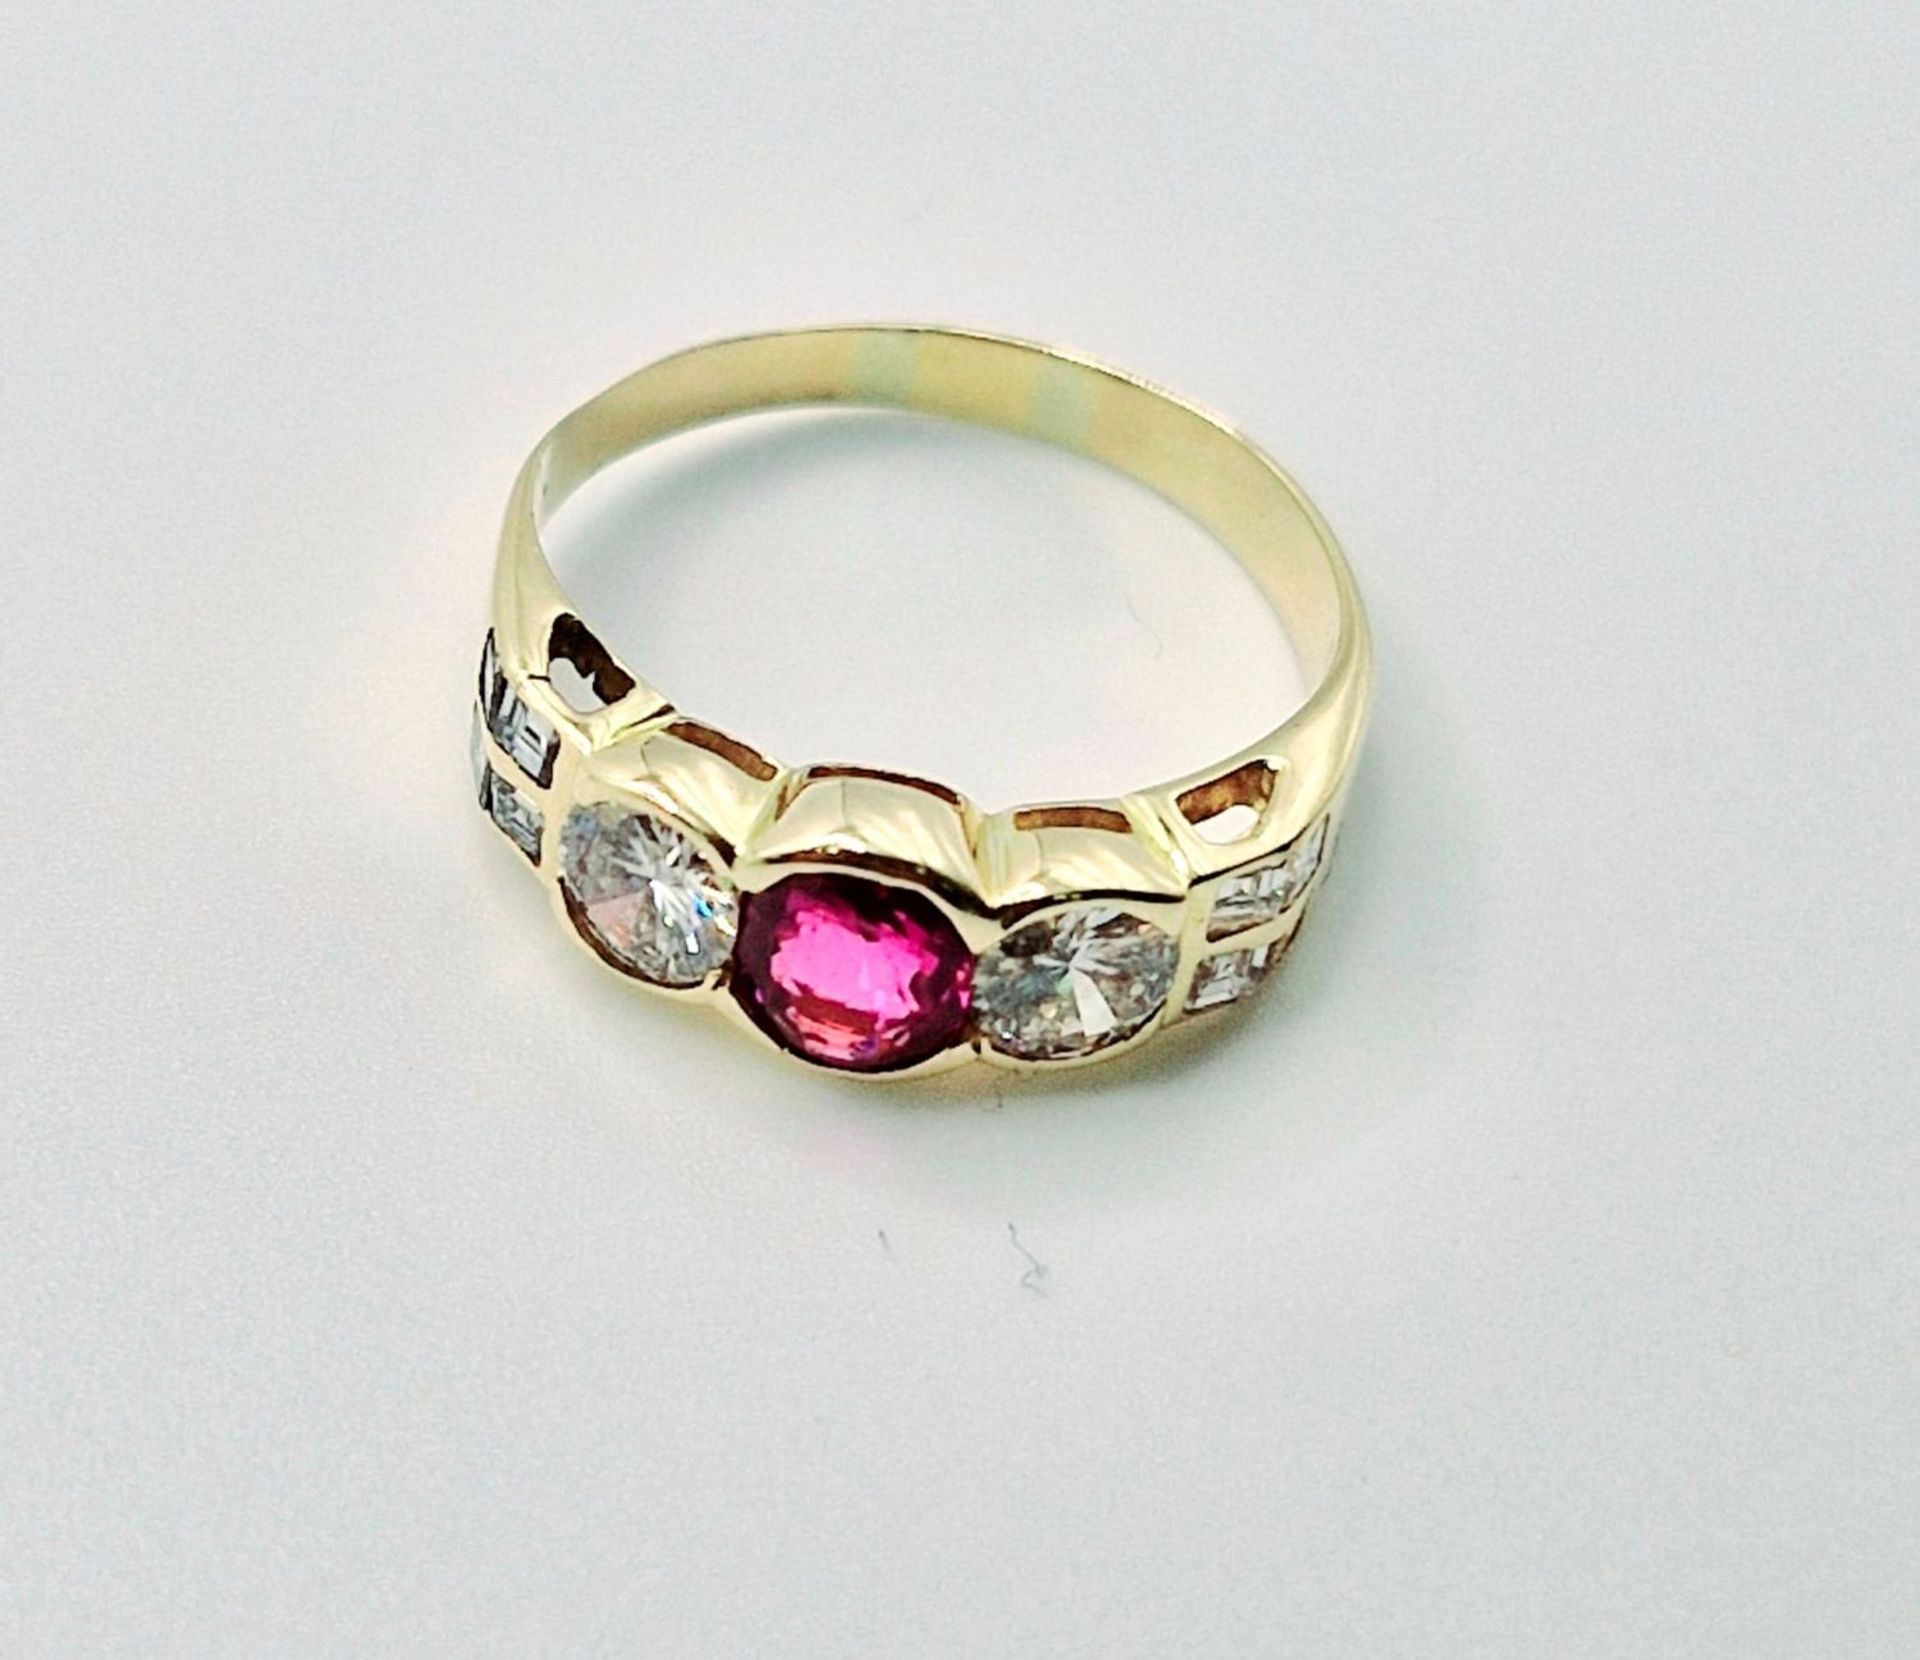 18K YELLOW GOLD - 1.70CT PINK SAPPHIRE & DIAMOND RING - £4K VALUATION - Image 4 of 4